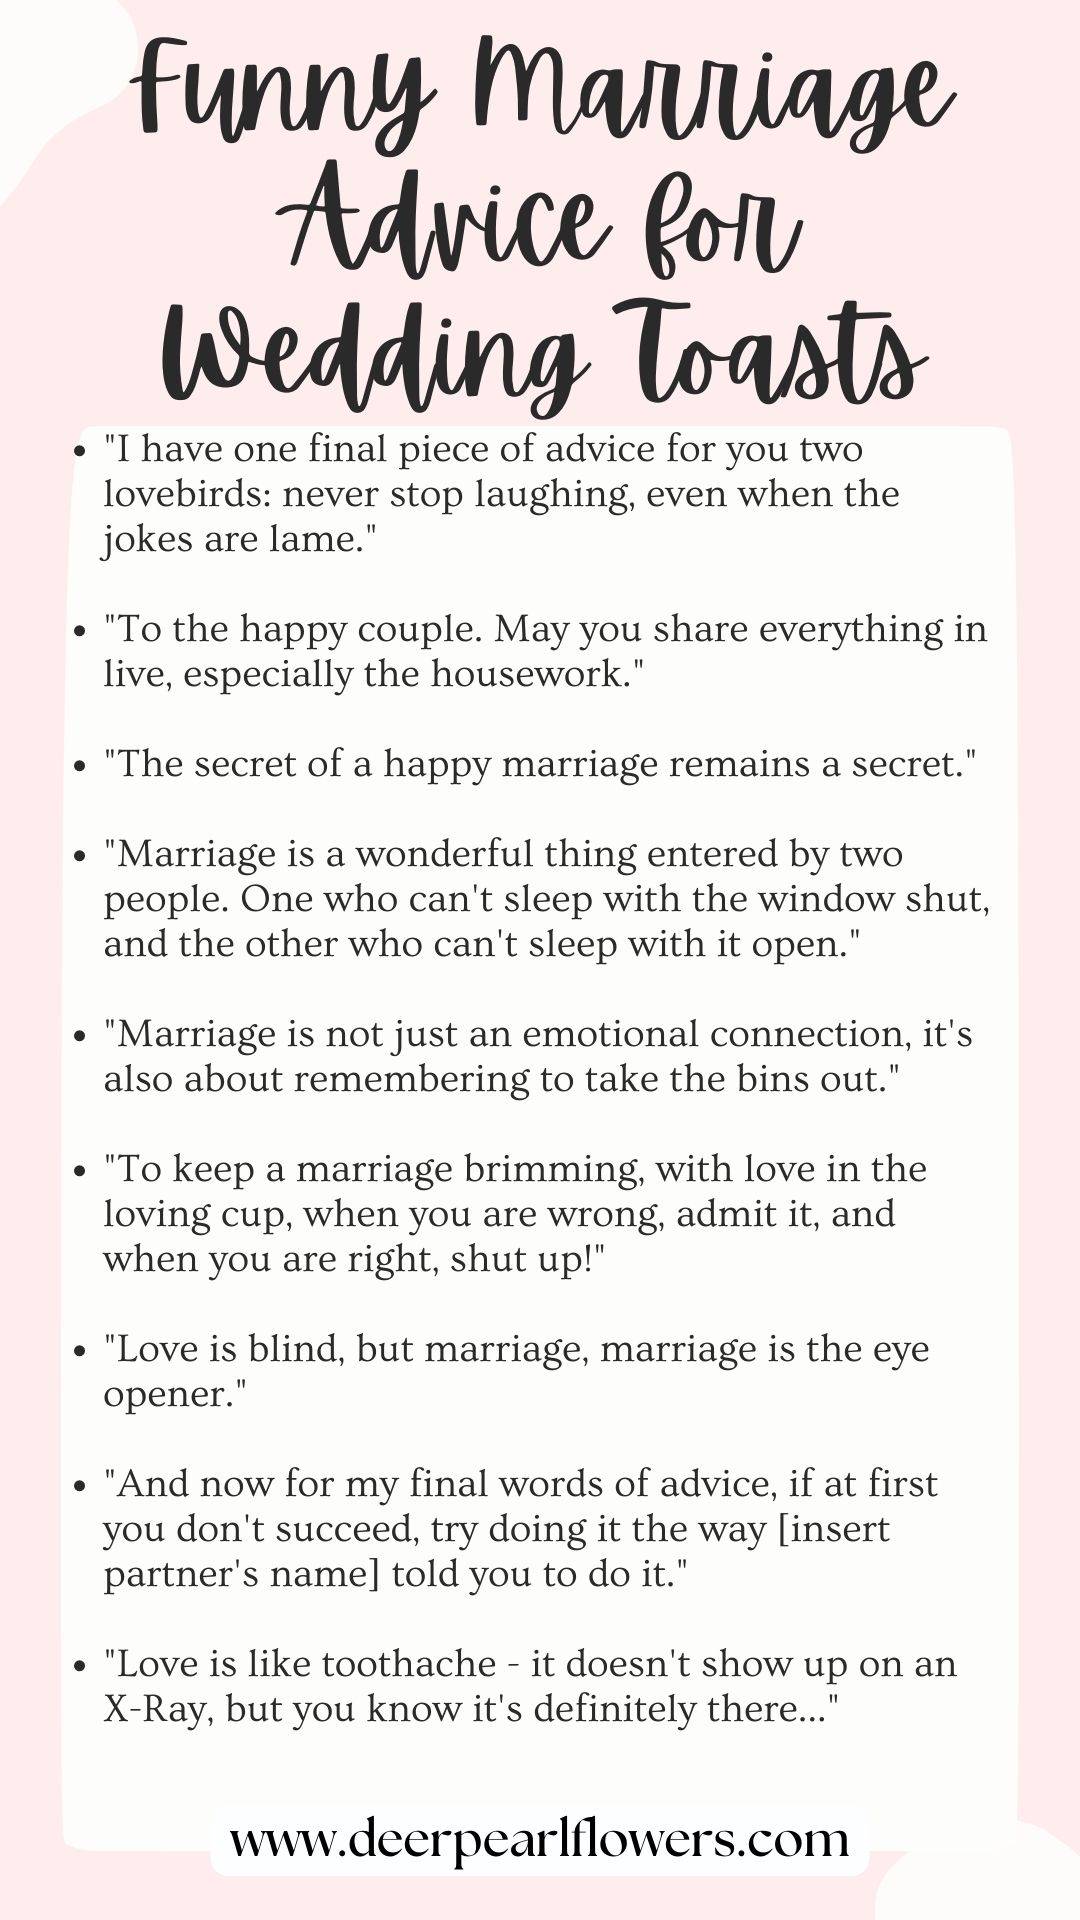 Funny Marriage Advice for Wedding Toasts